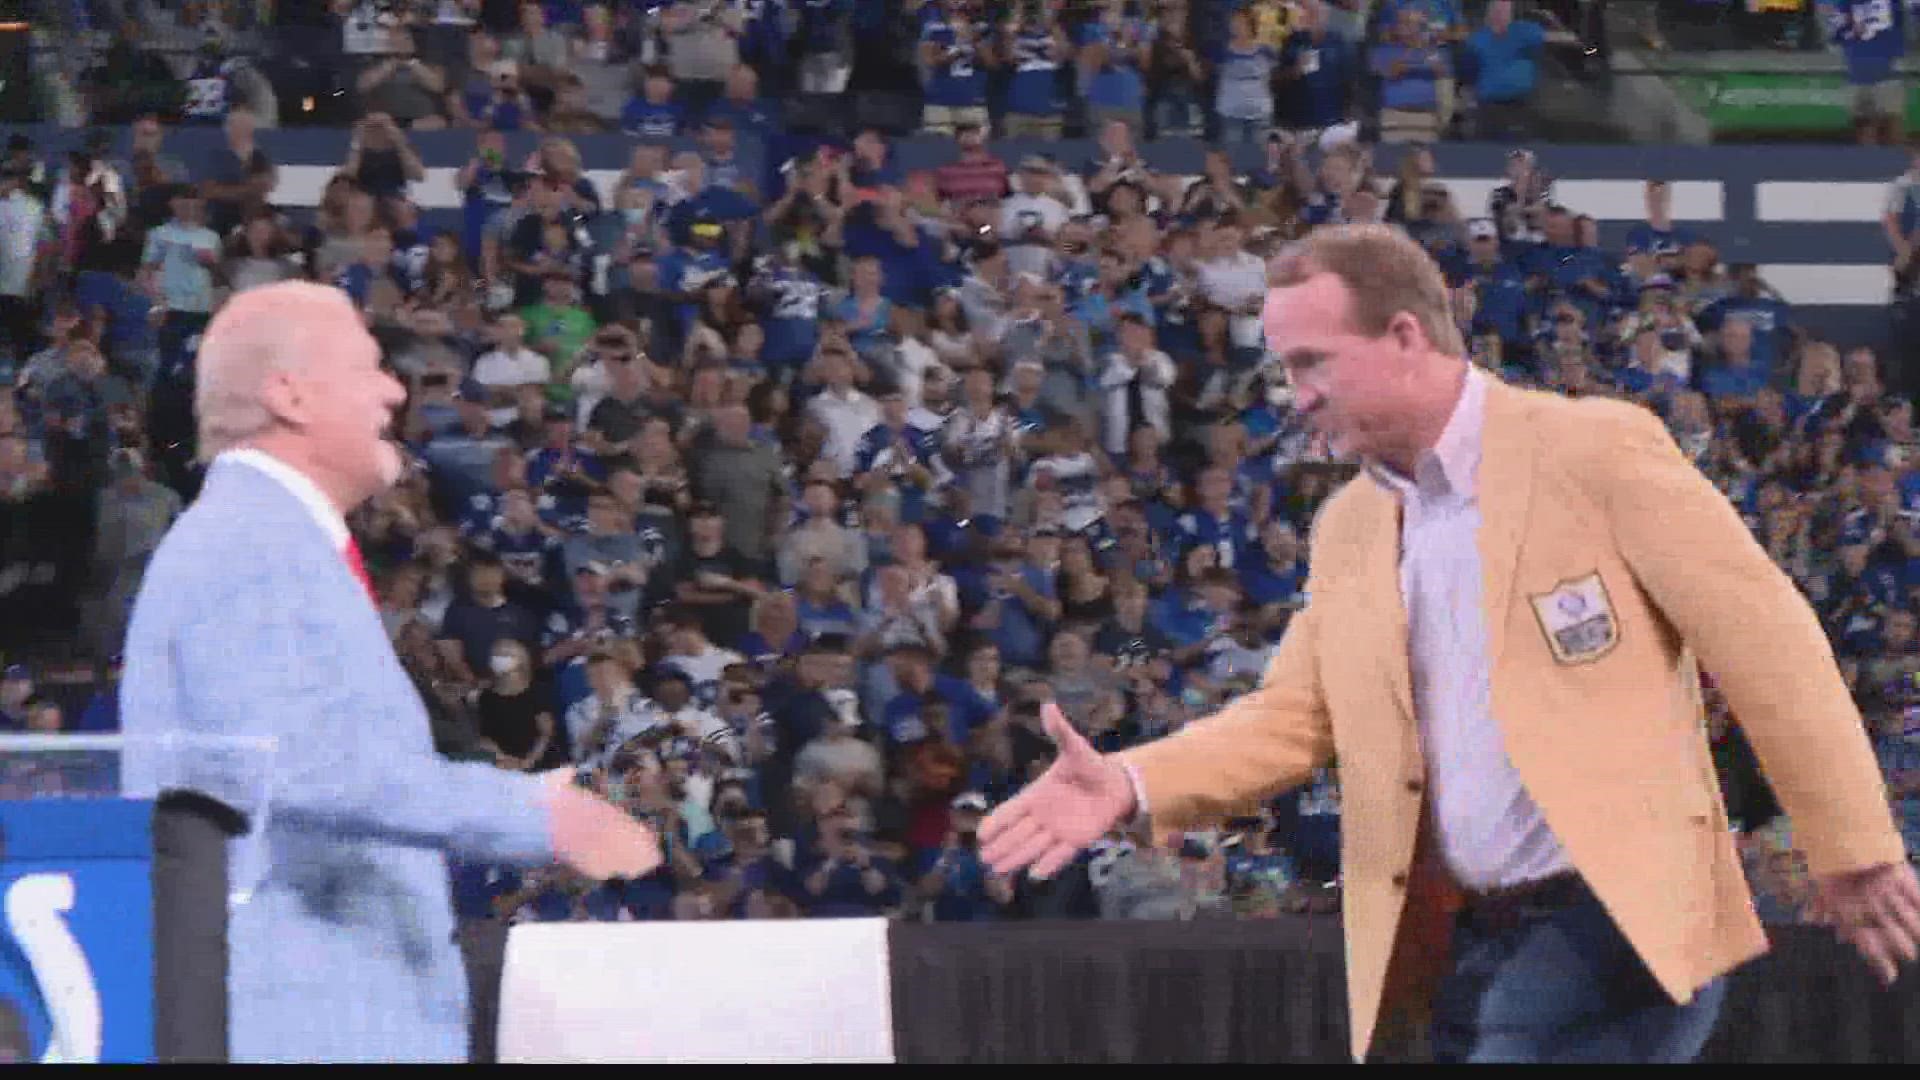 Peyton Manning and Edgerrin James were back in Indy to get their Hall of Fame rings.